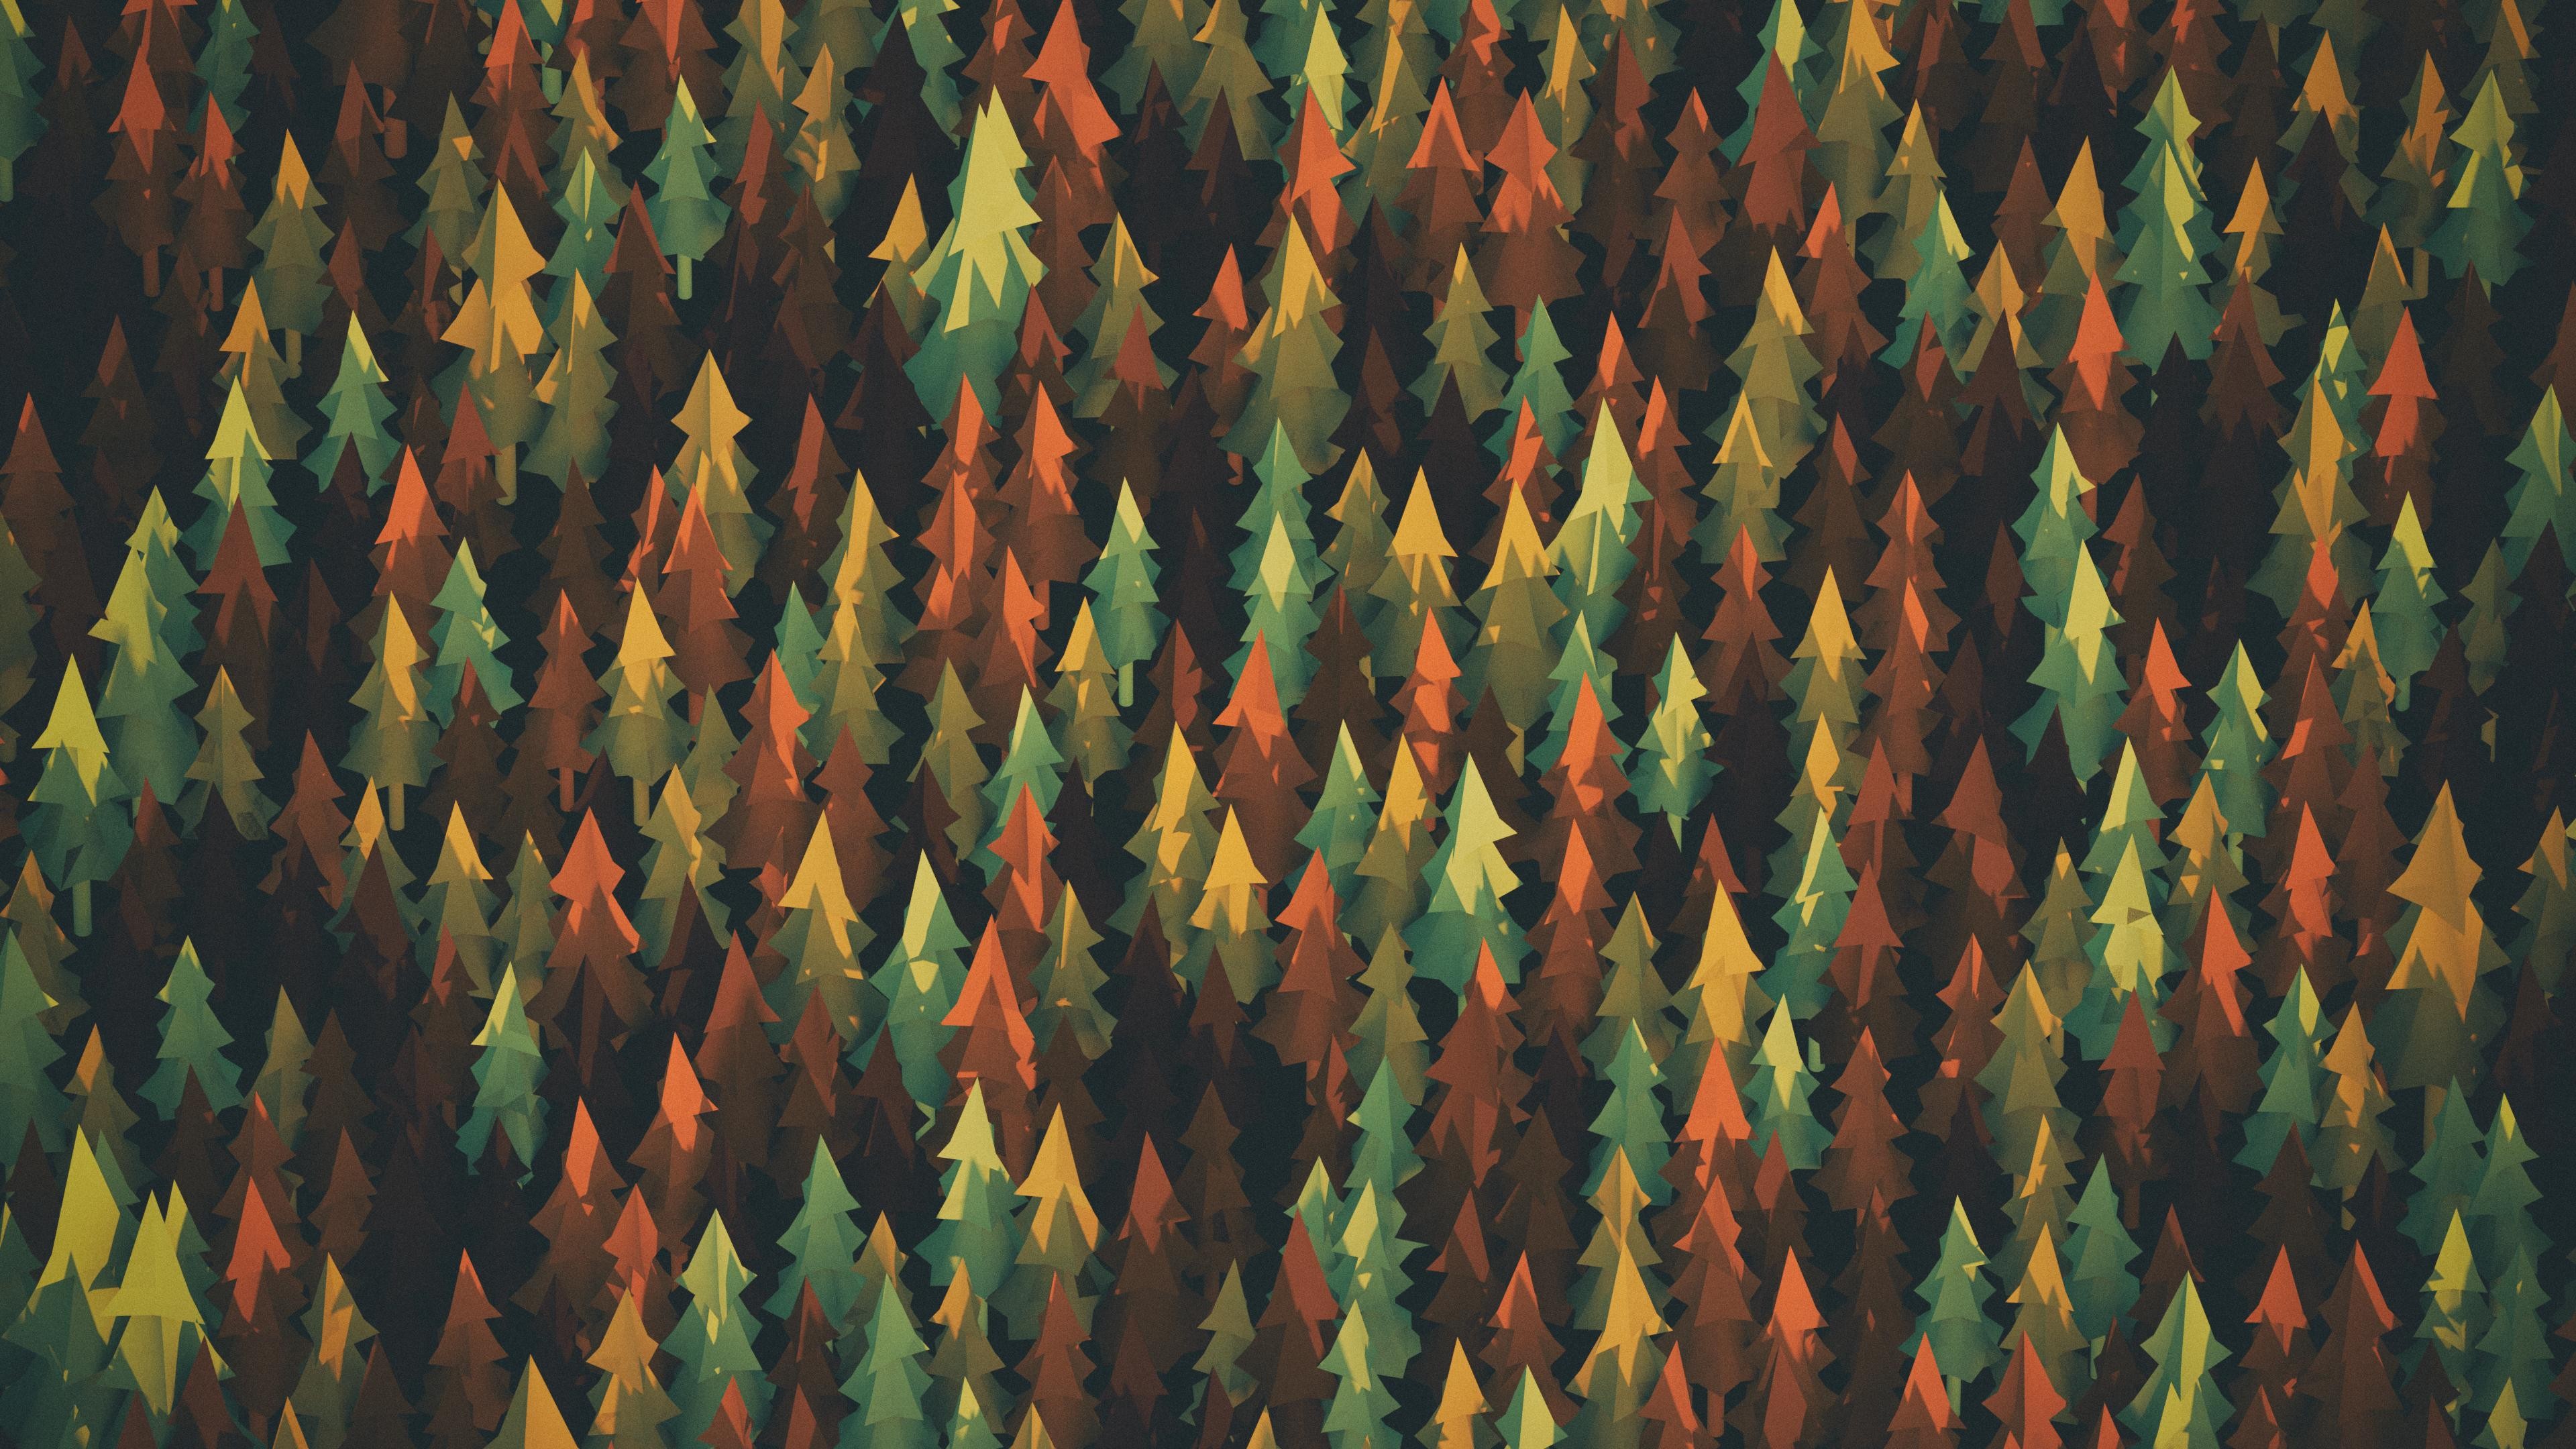 Wallpaper, painting, forest, fall, nature, branch, green, pattern, texture, tree, autumn, leaf, 3840x2160 px, biome, grass family, plant stem 3840x2160